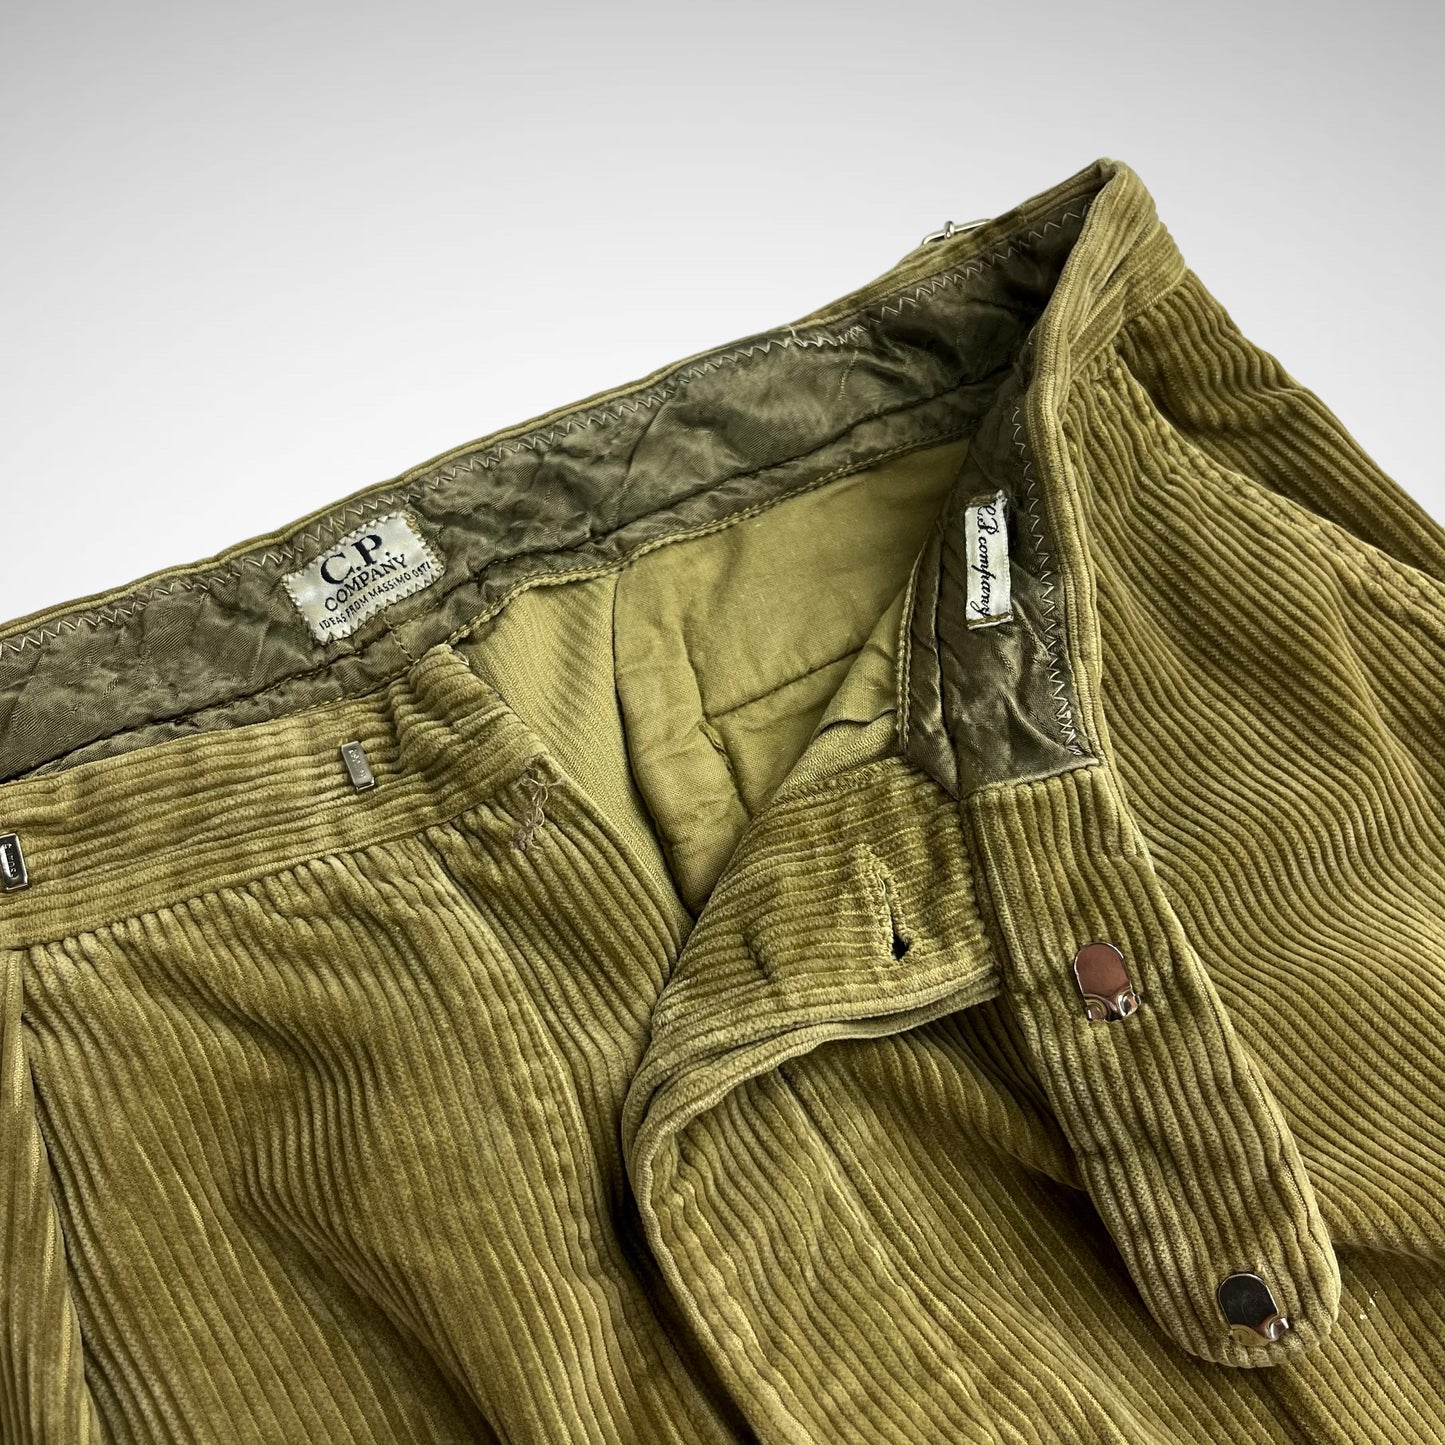 CP Company ‘Ideas by Massimo Osti’ Corduroy Trousers (1980s)